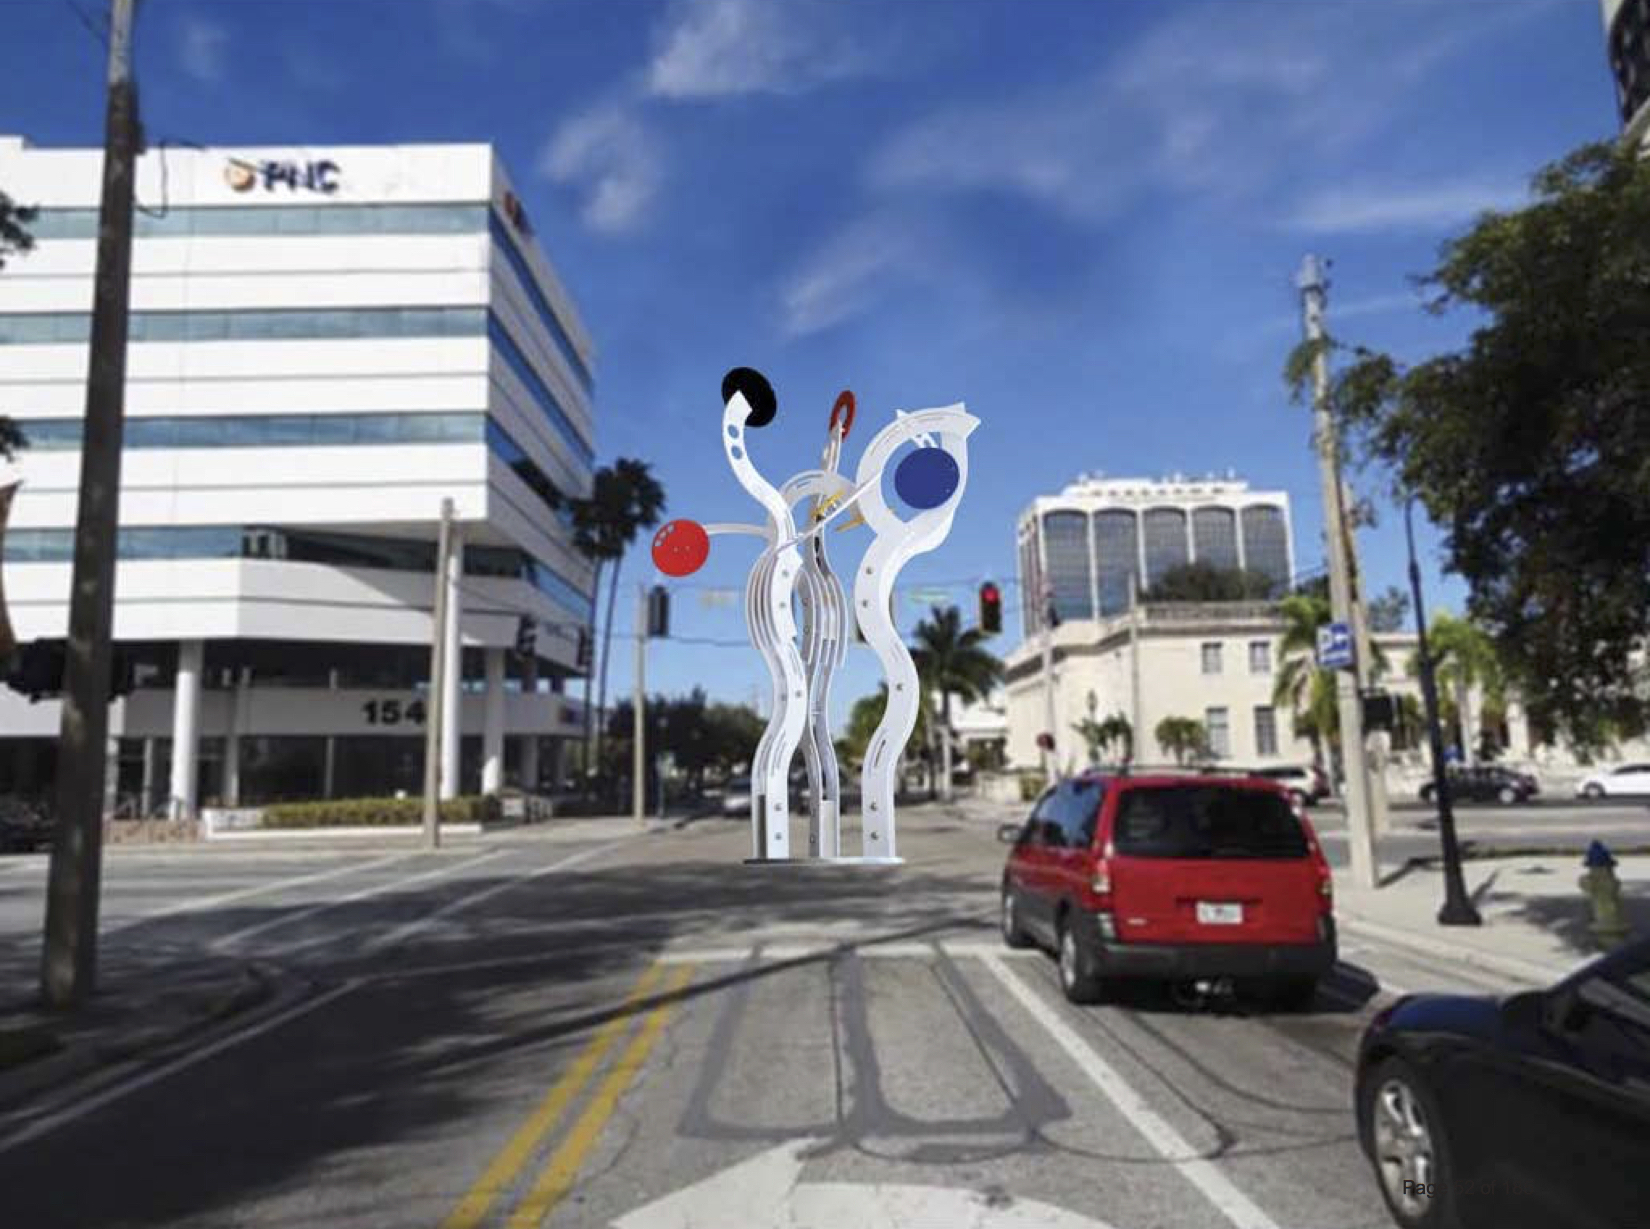 The sculpture “Bravo!,” depicted in this image, will be added to the roundabout in the summer.